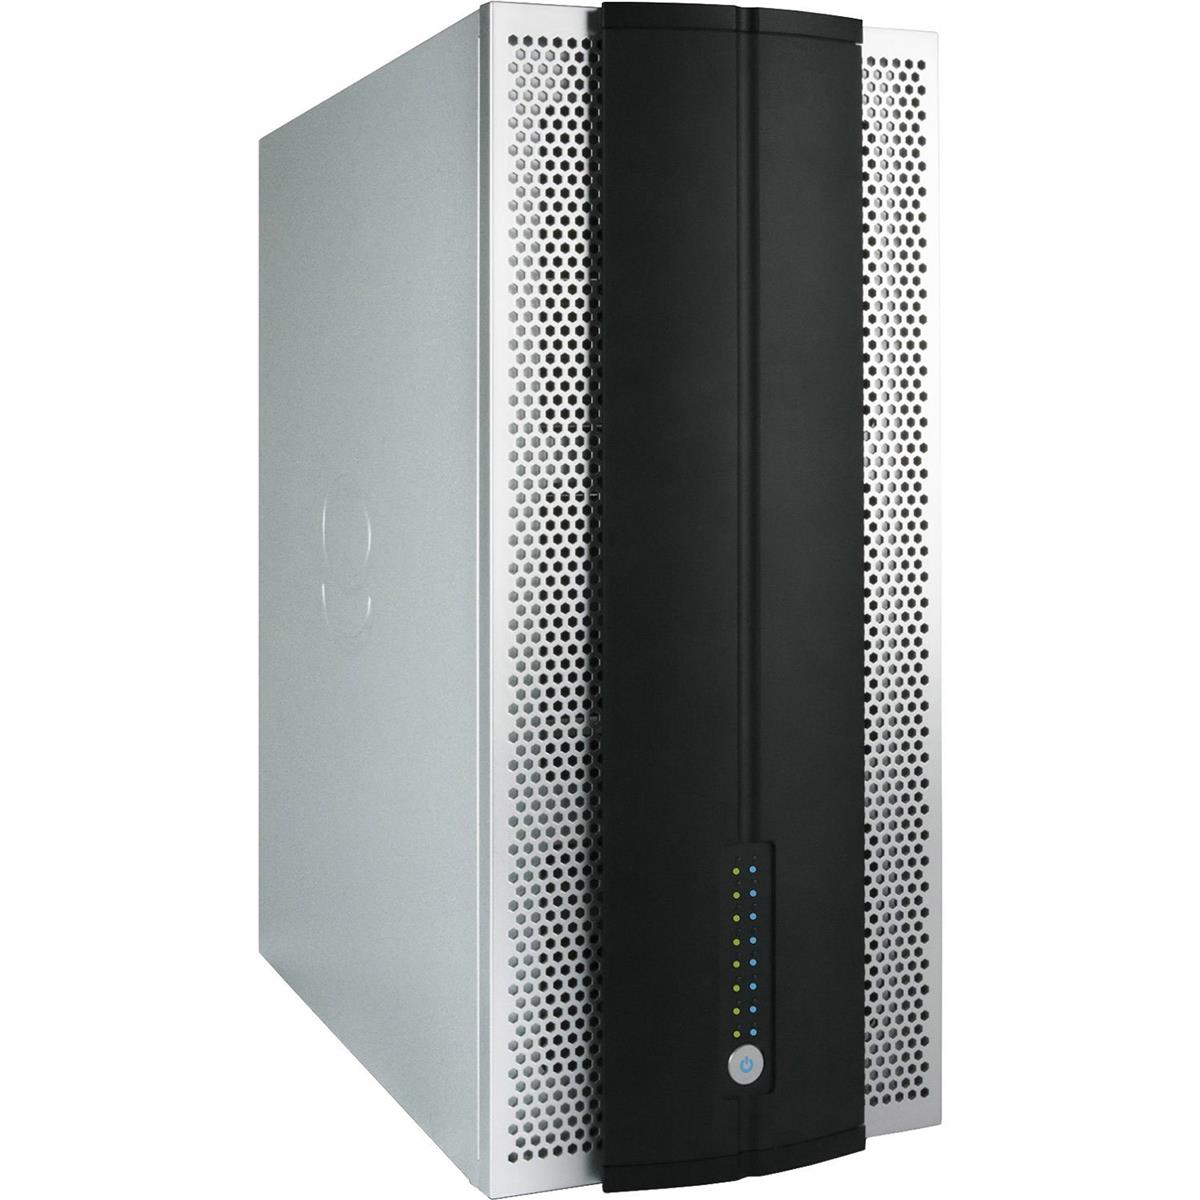 Image of Accusys T-Share A12T3-SHARE 12-Bay Thunderbolt Shareable Storage